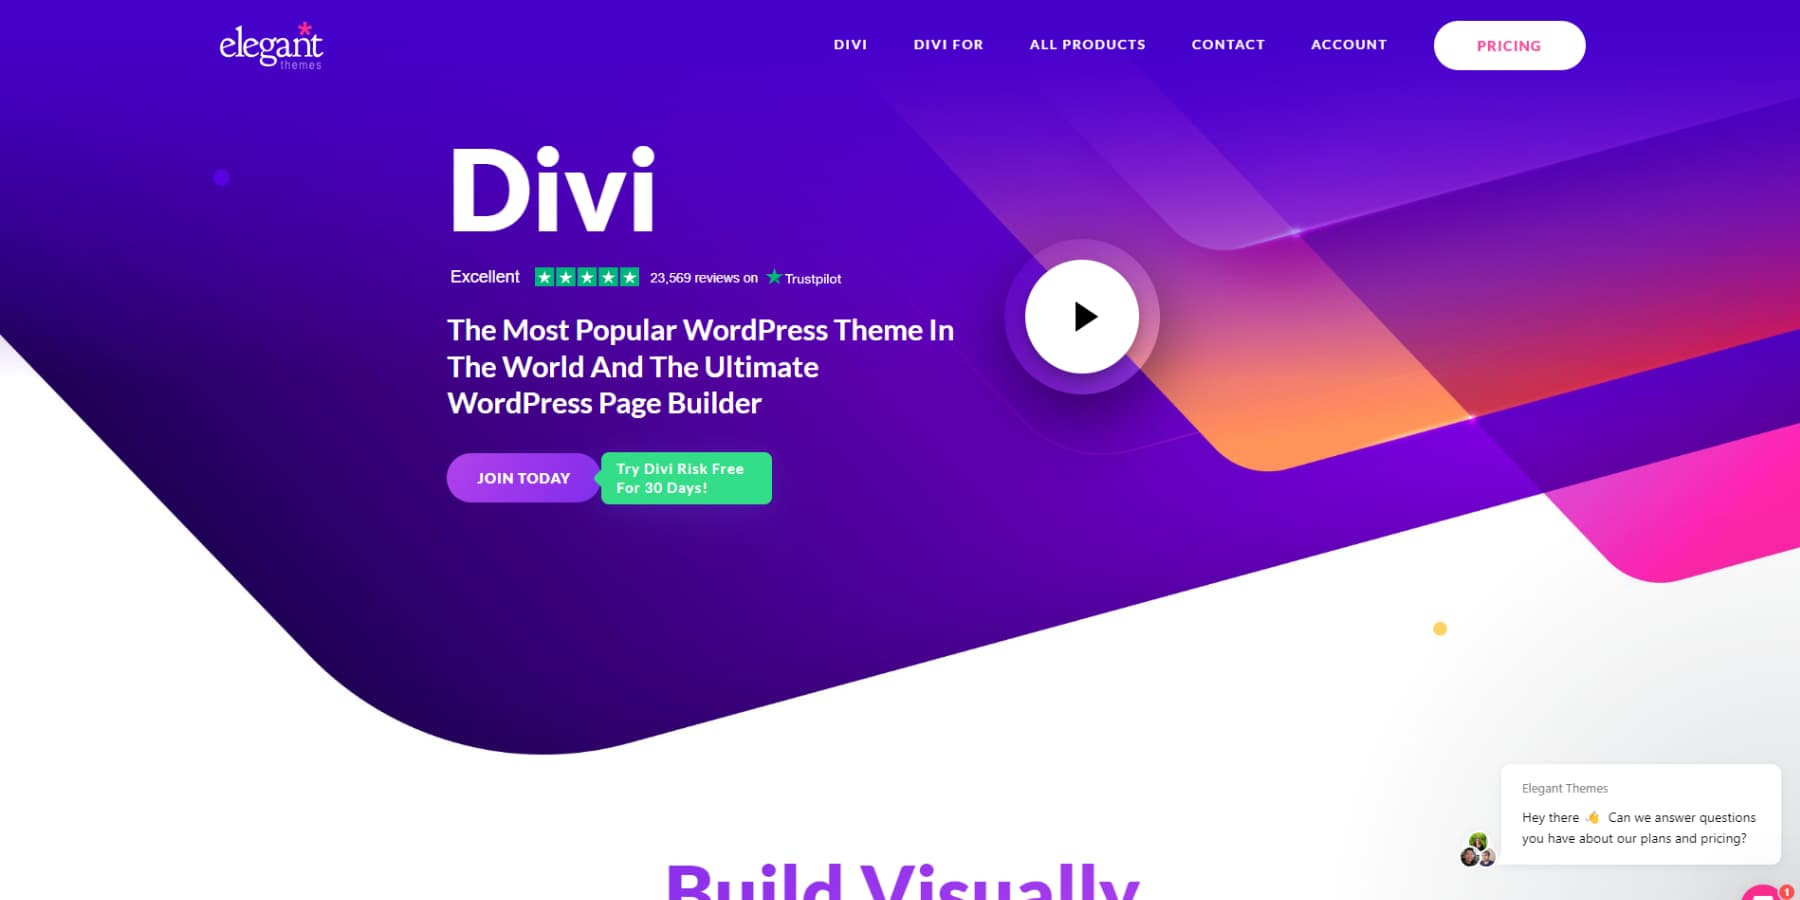 A screenshot of Divi's home page